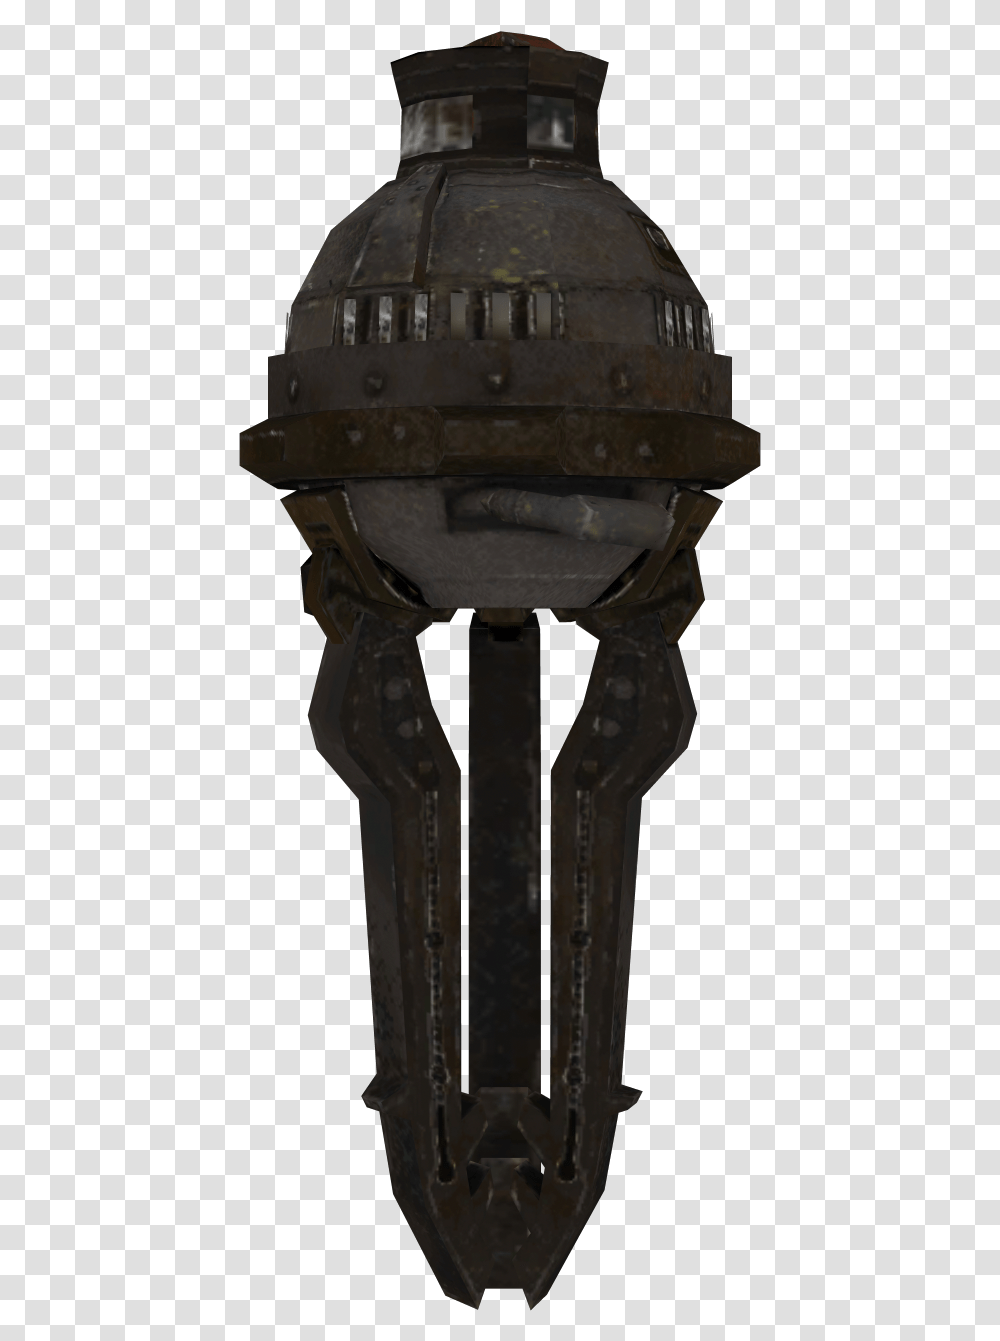 Call Of Duty Wiki G Strike Grenades, Building, Helmet, Bronze, Architecture Transparent Png